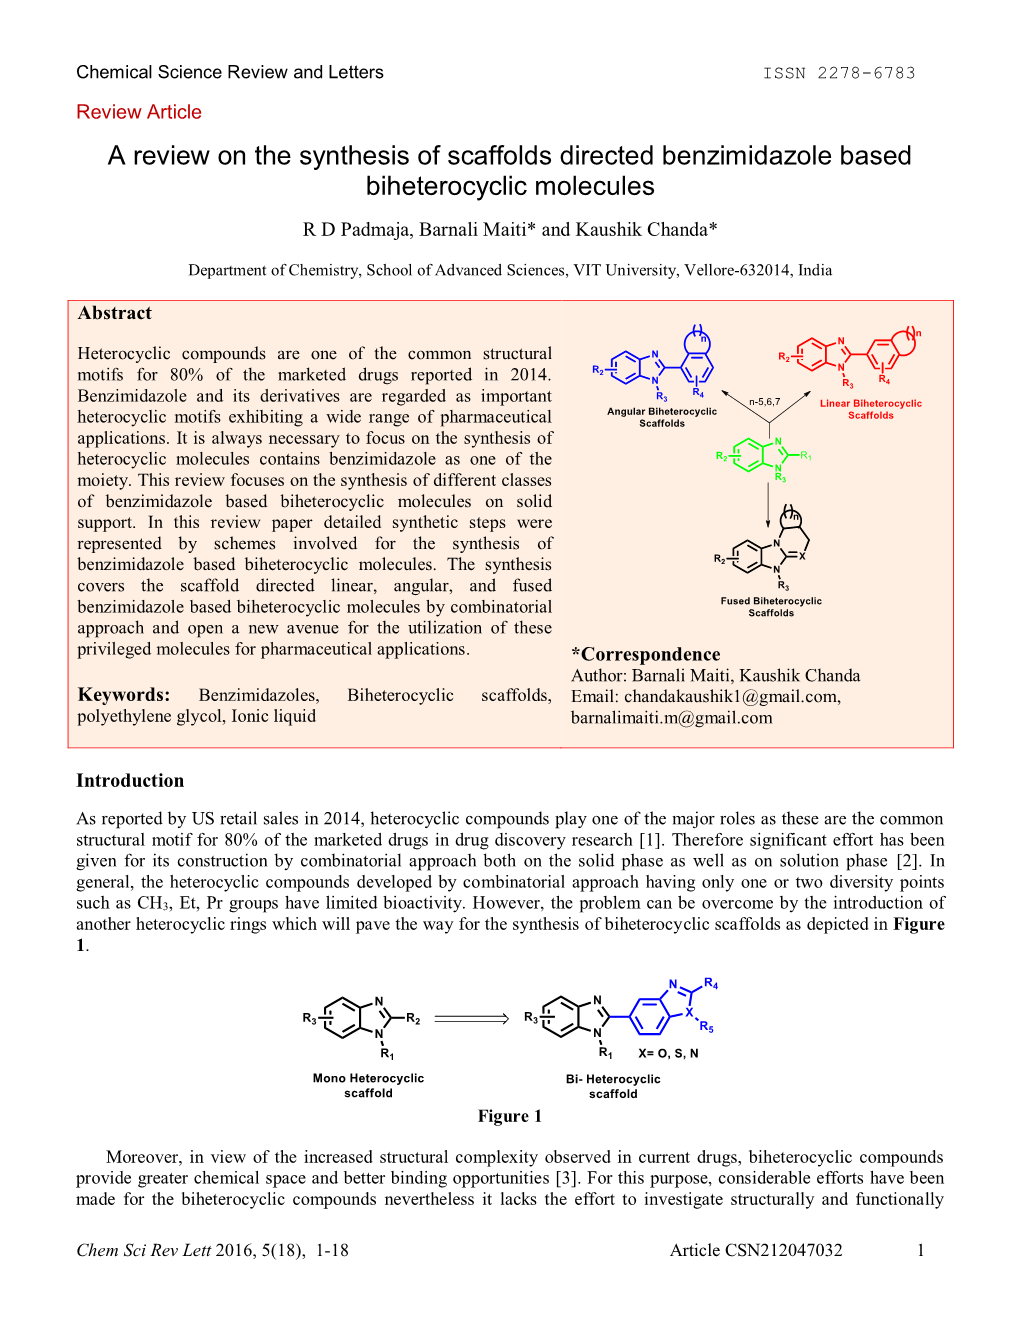 Review Article a Review on the Synthesis of Scaffolds Directed Benzimidazole Based Biheterocyclic Molecules R D Padmaja, Barnali Maiti* and Kaushik Chanda*